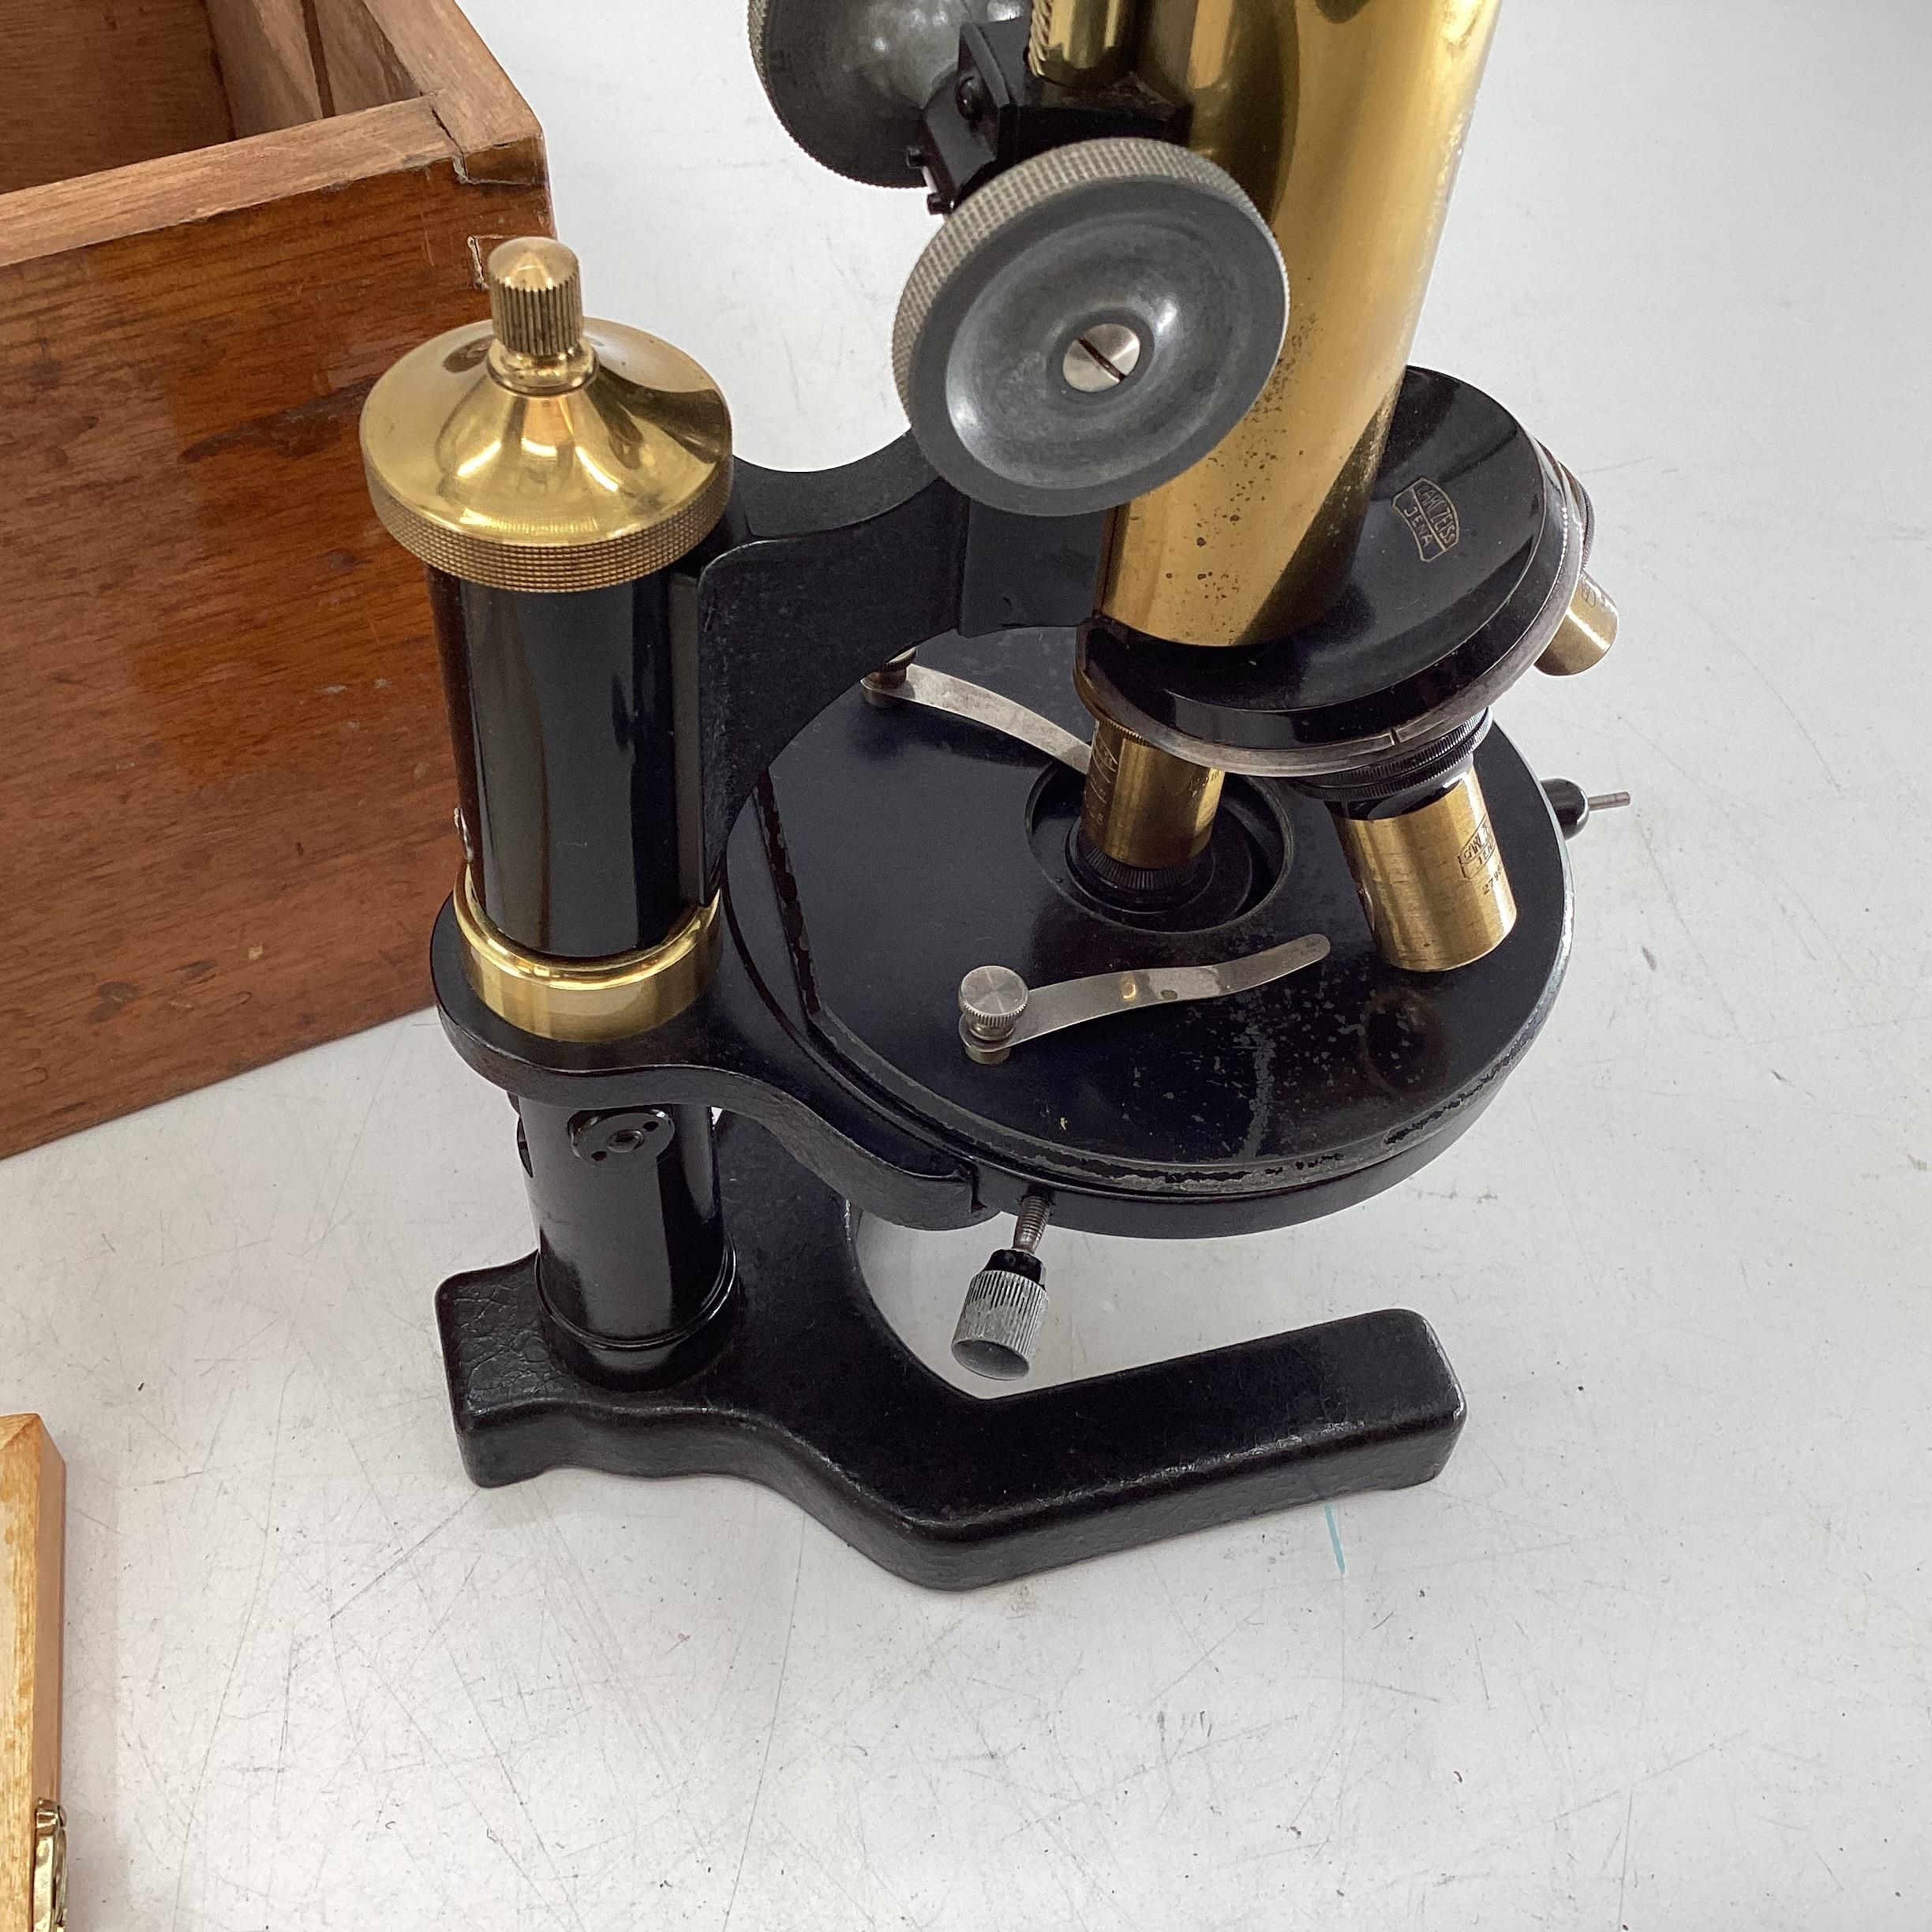 ZEISS microscope with glass slides - Image 4 of 9